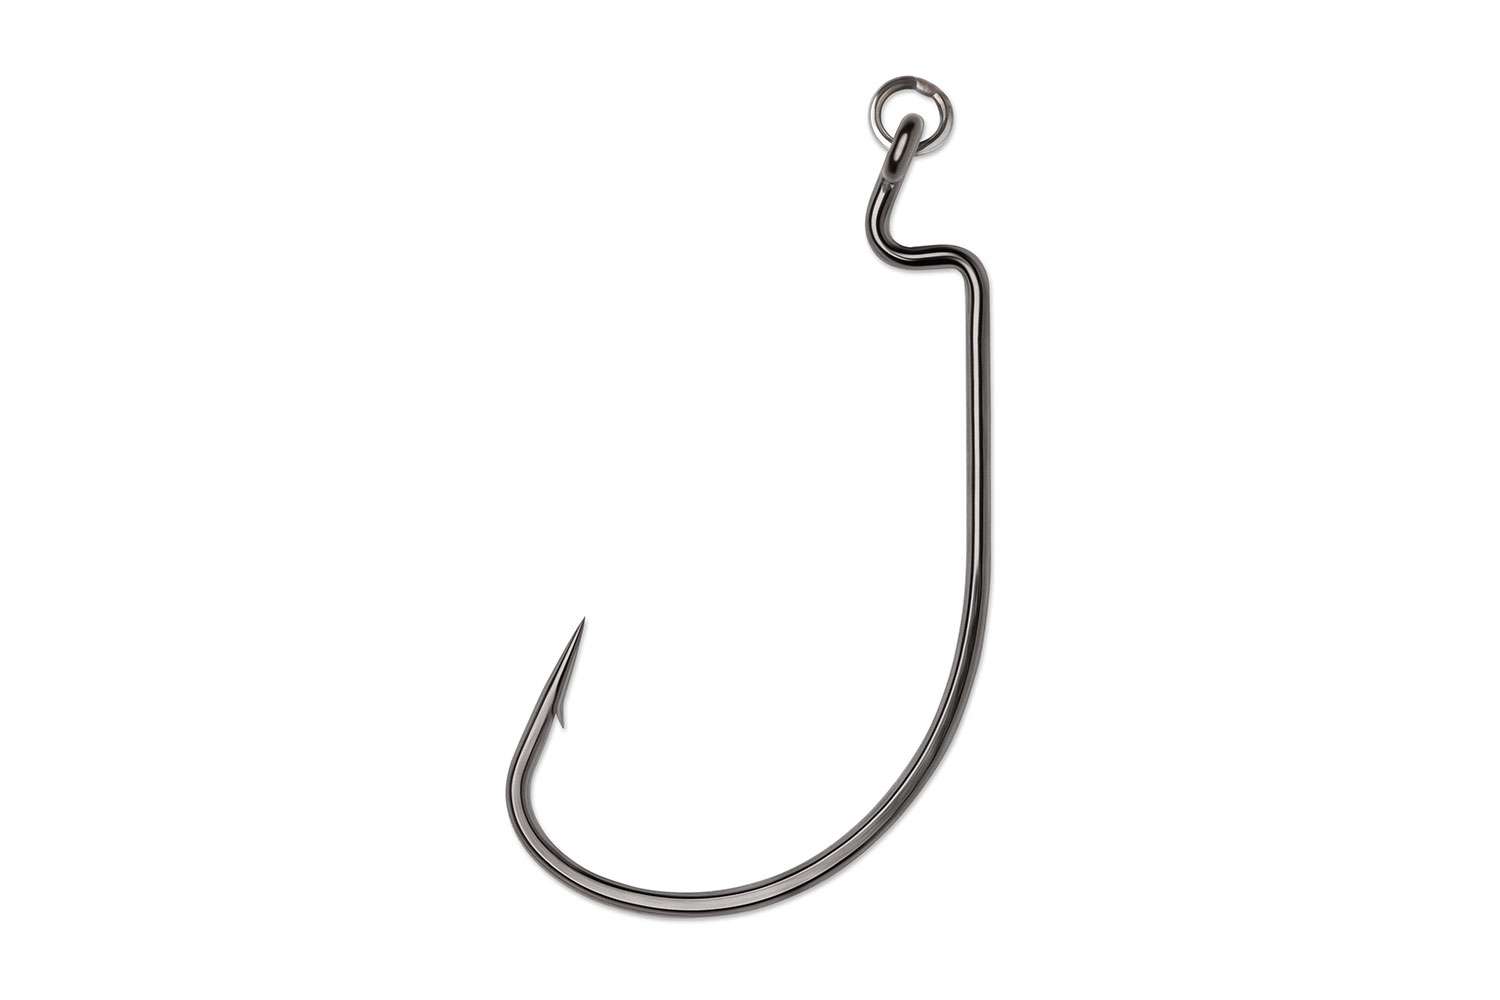    <B>VMC Ringed HD Wide Gap </B>
<BR>The proven VMC Heavy Duty Wide Gap with a welded stainless steel ring provides more mobility, provides a natural, free and fluid action to your bait and reduces leverage during the fight. Available in sizes 2/0 to 6/0. 
<BR>
<B>MSRP: $3.99</B>